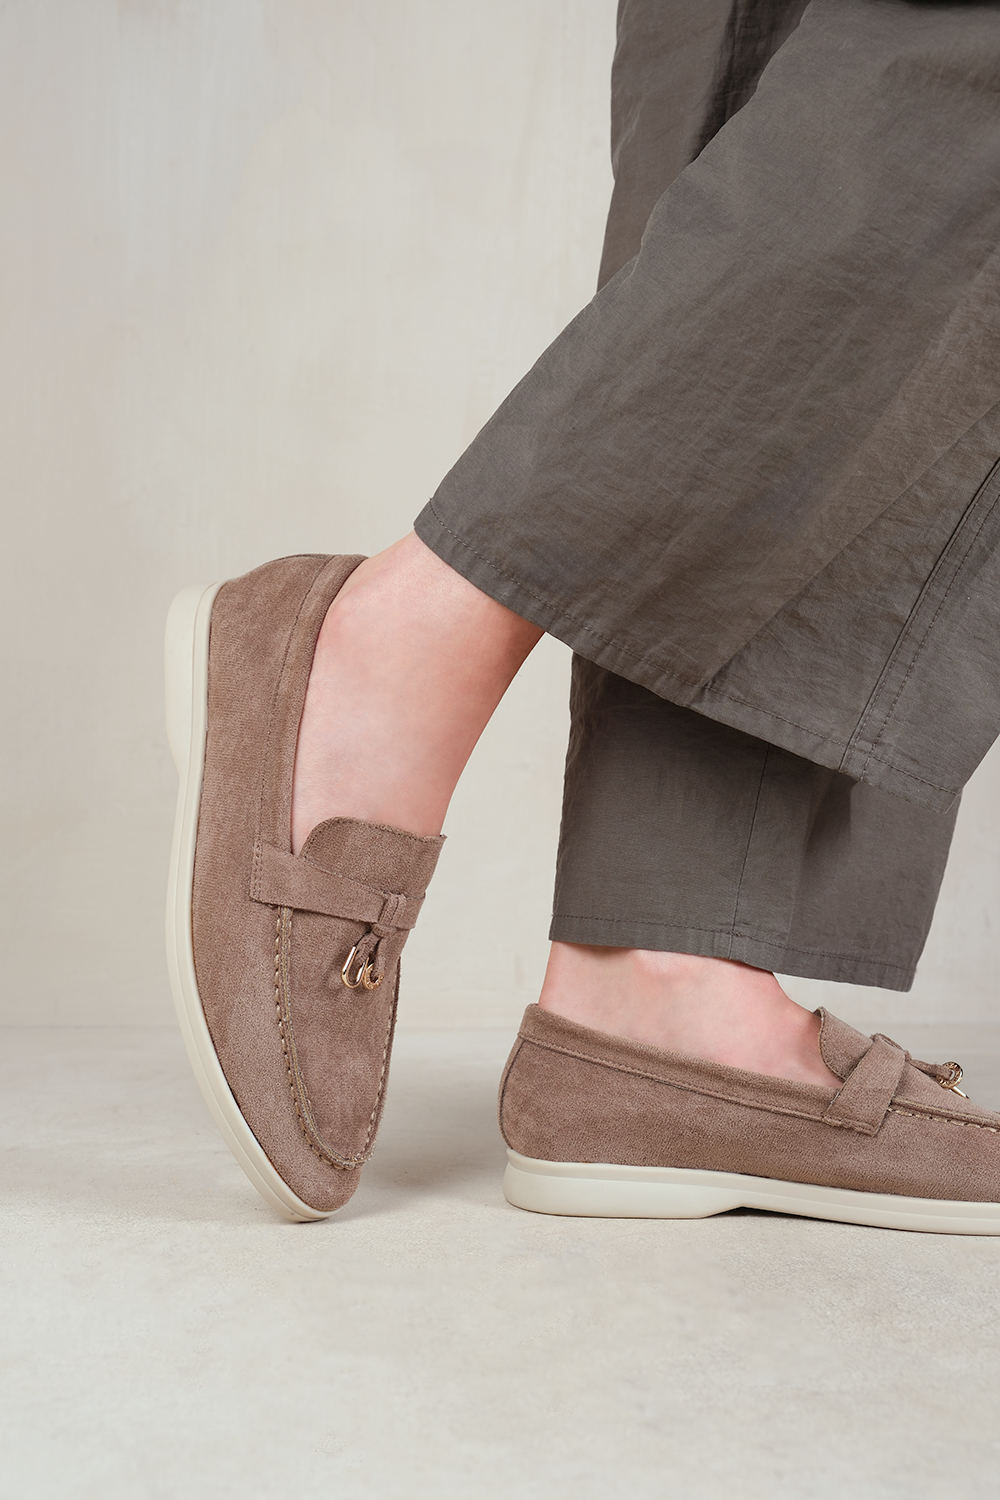 PEGASUS SLIP ON TRIM LOAFERS WITH ACCESSORY DETAILING IN KHAKI SUEDE